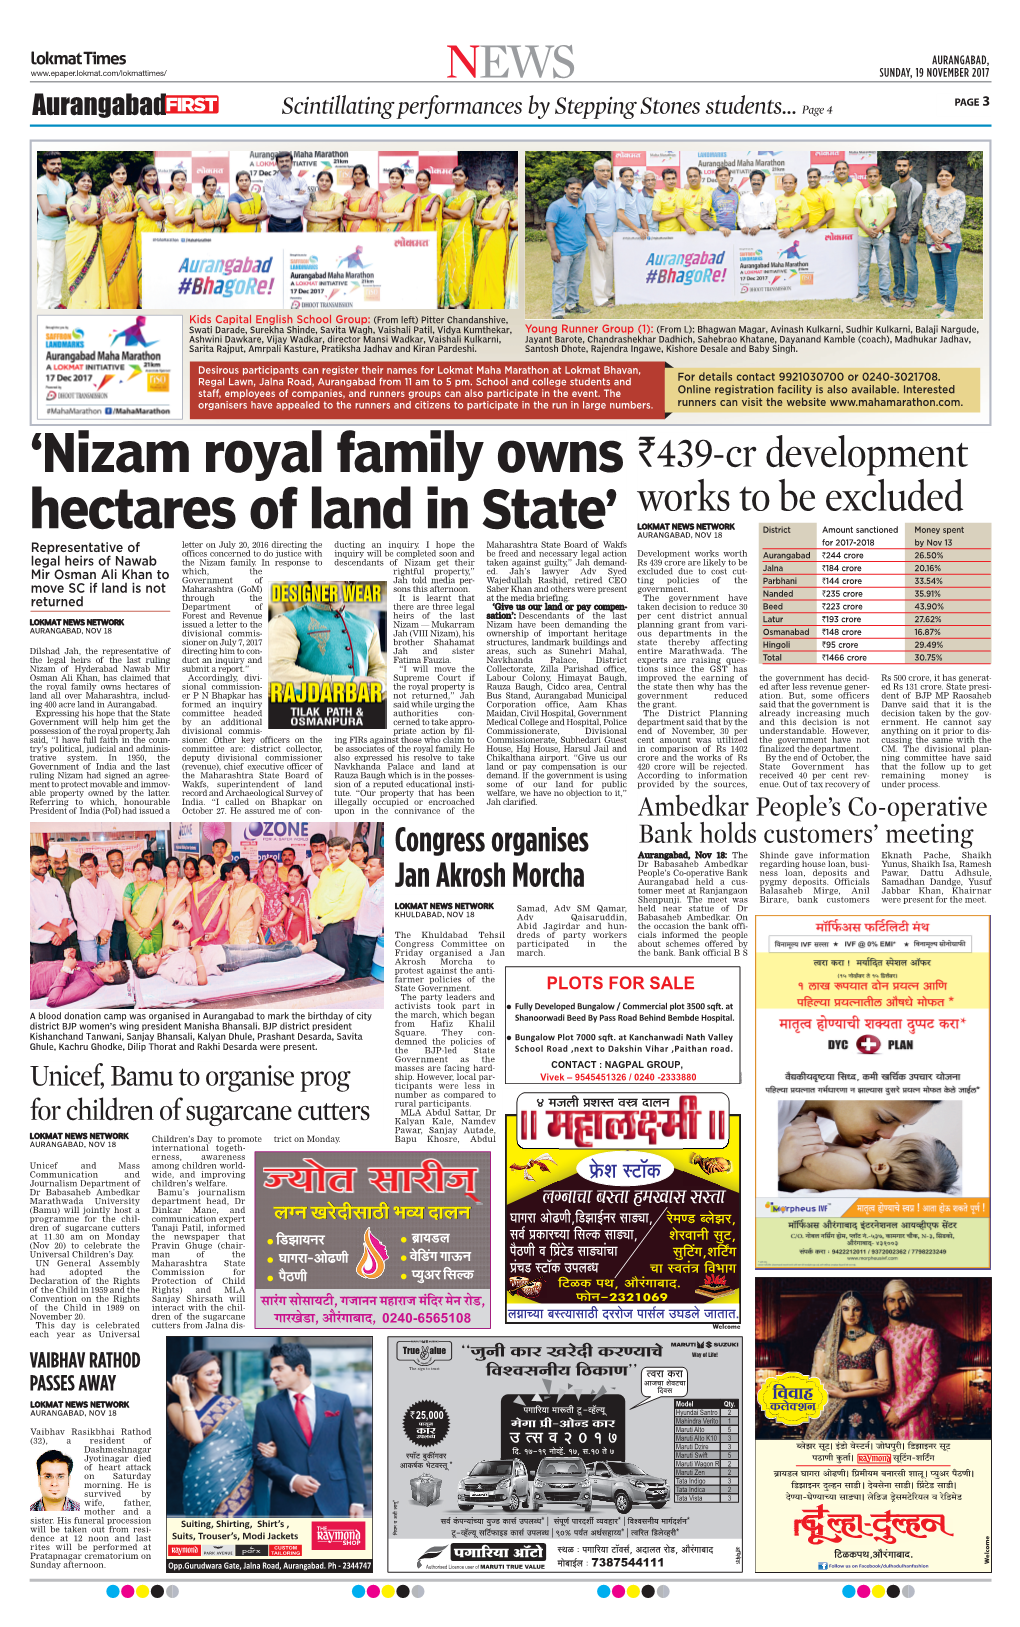 'Nizam Royal Family Owns Hectares of Land in State'